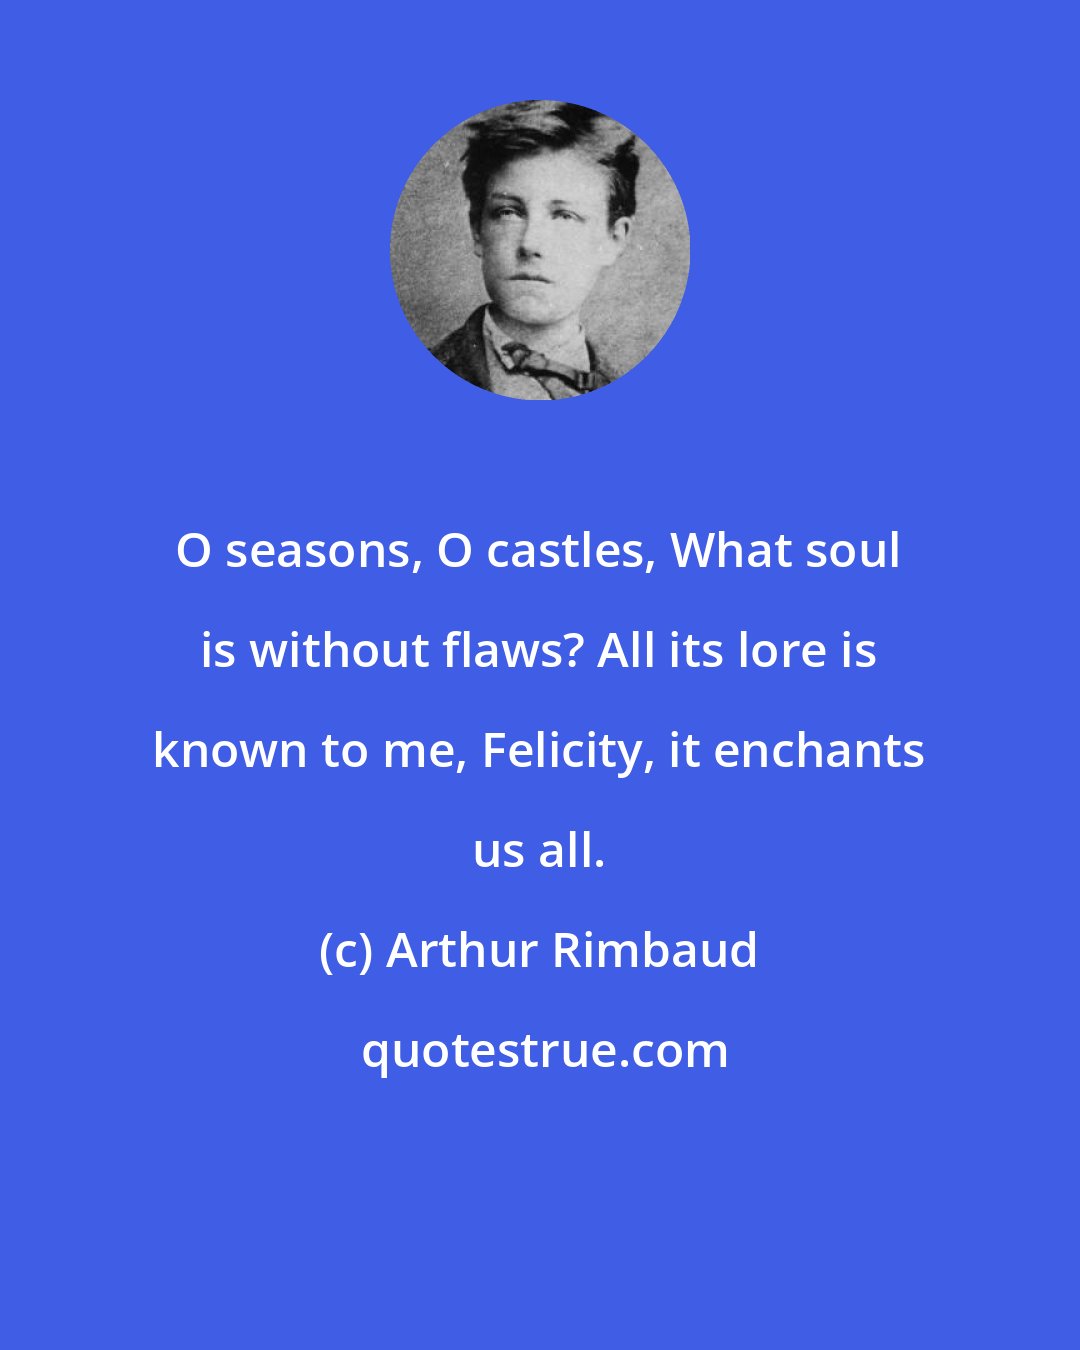 Arthur Rimbaud: O seasons, O castles, What soul is without flaws? All its lore is known to me, Felicity, it enchants us all.